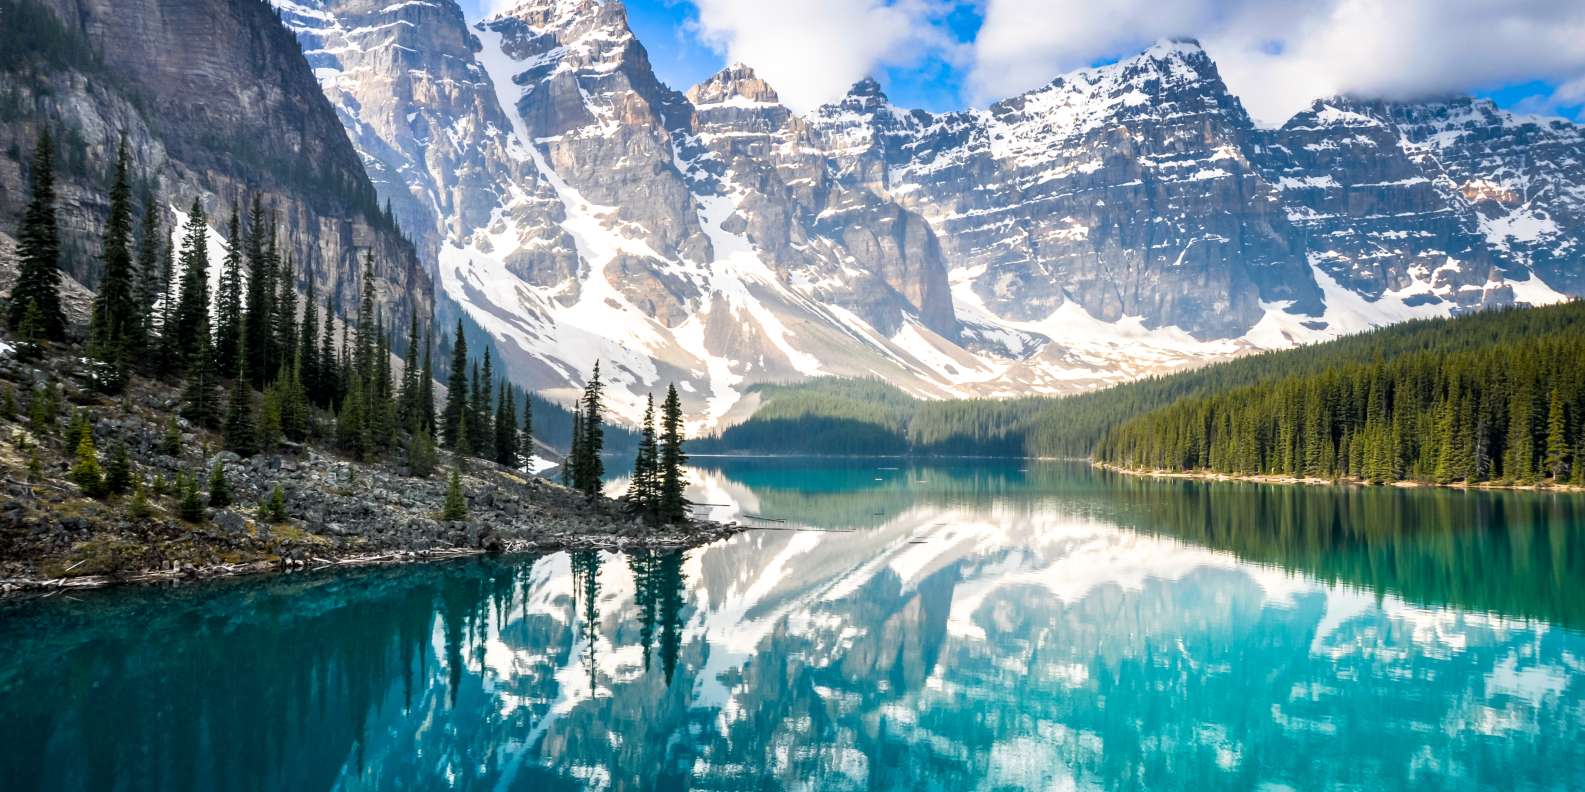 The BEST Canada Tours and Things to Do in 2023 - FREE Cancellation | GetYourGuide